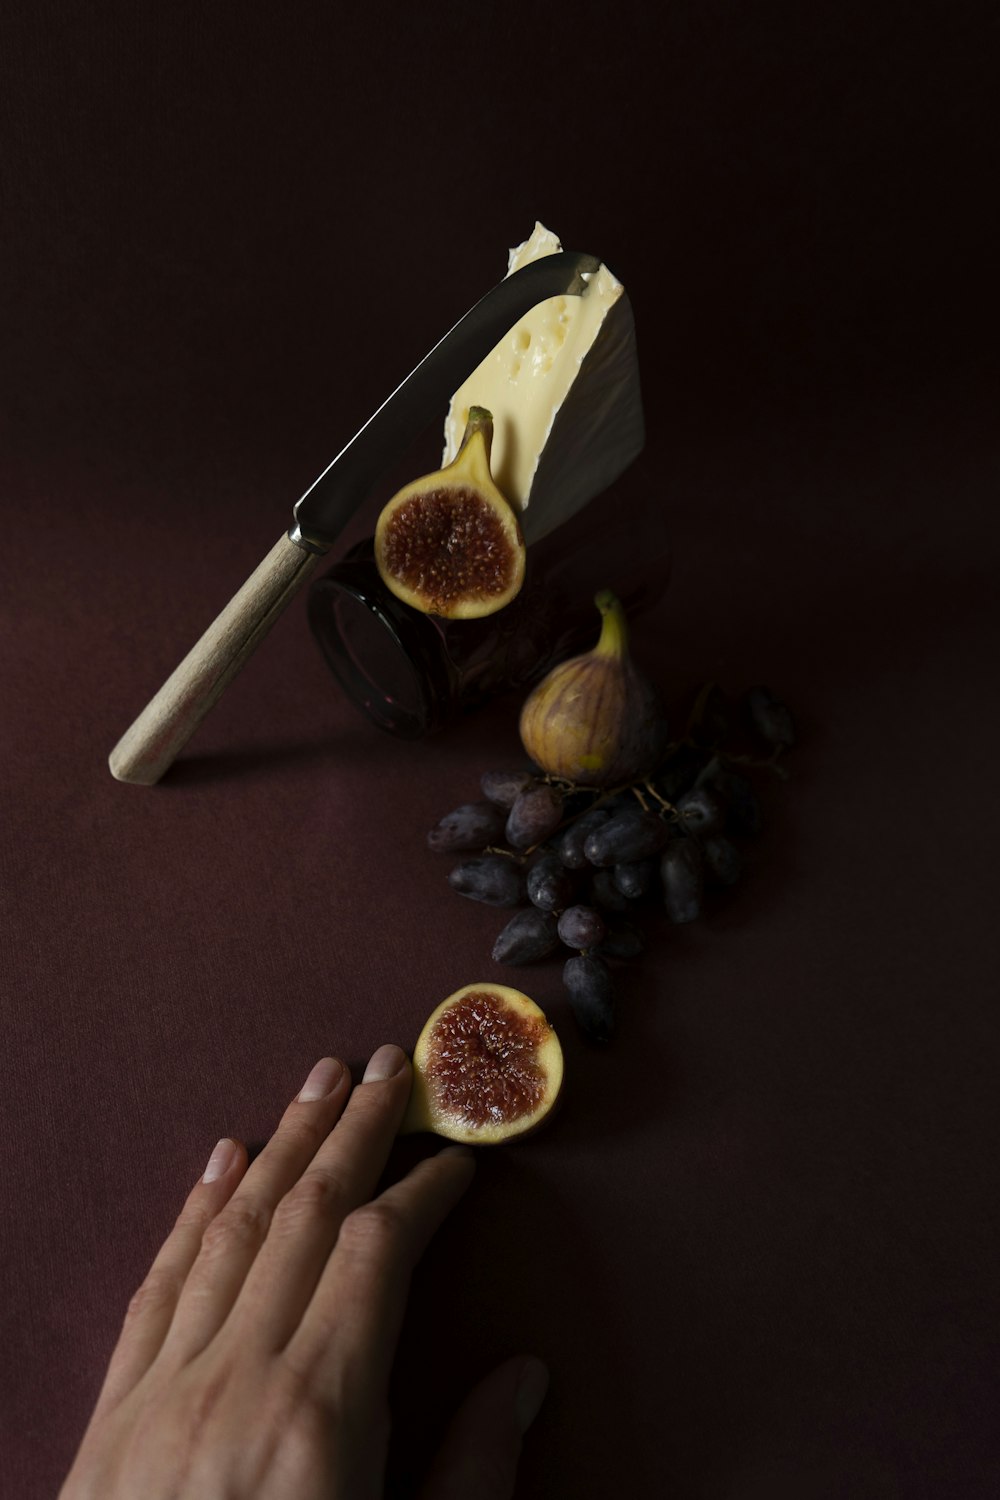 a hand reaching for a piece of cheese next to figs and grapes